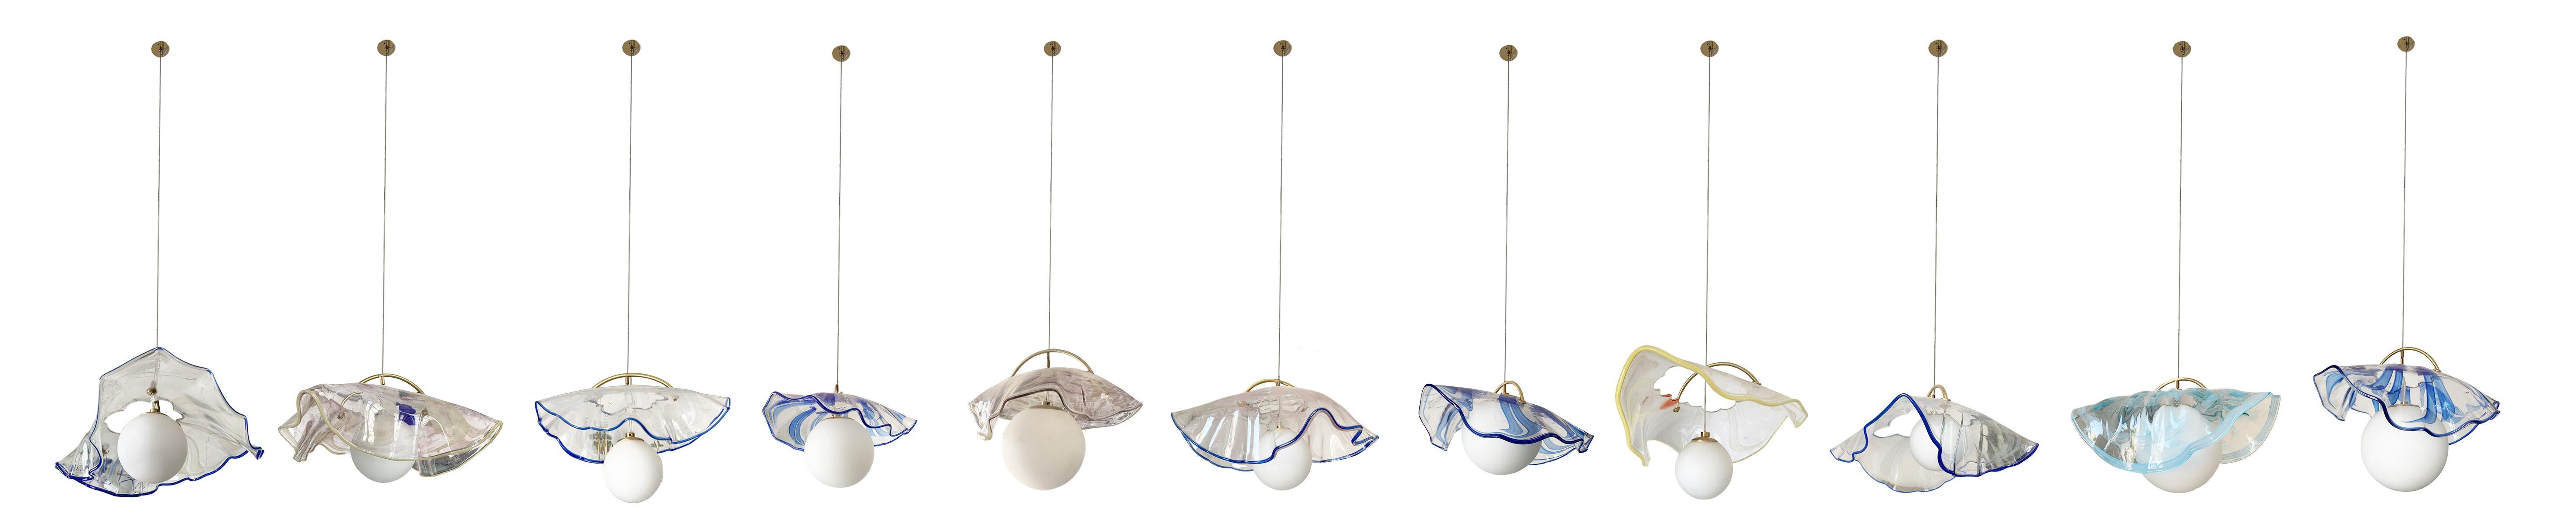 jellyfish pendant lamp by Sema Topaloglu

jellyfish lamps are a collection, the price is for 3 items.

This product is hand-crafted therefore each production is unique and might not be exactly the same as the visual.

Sema Topaloglu Studio is